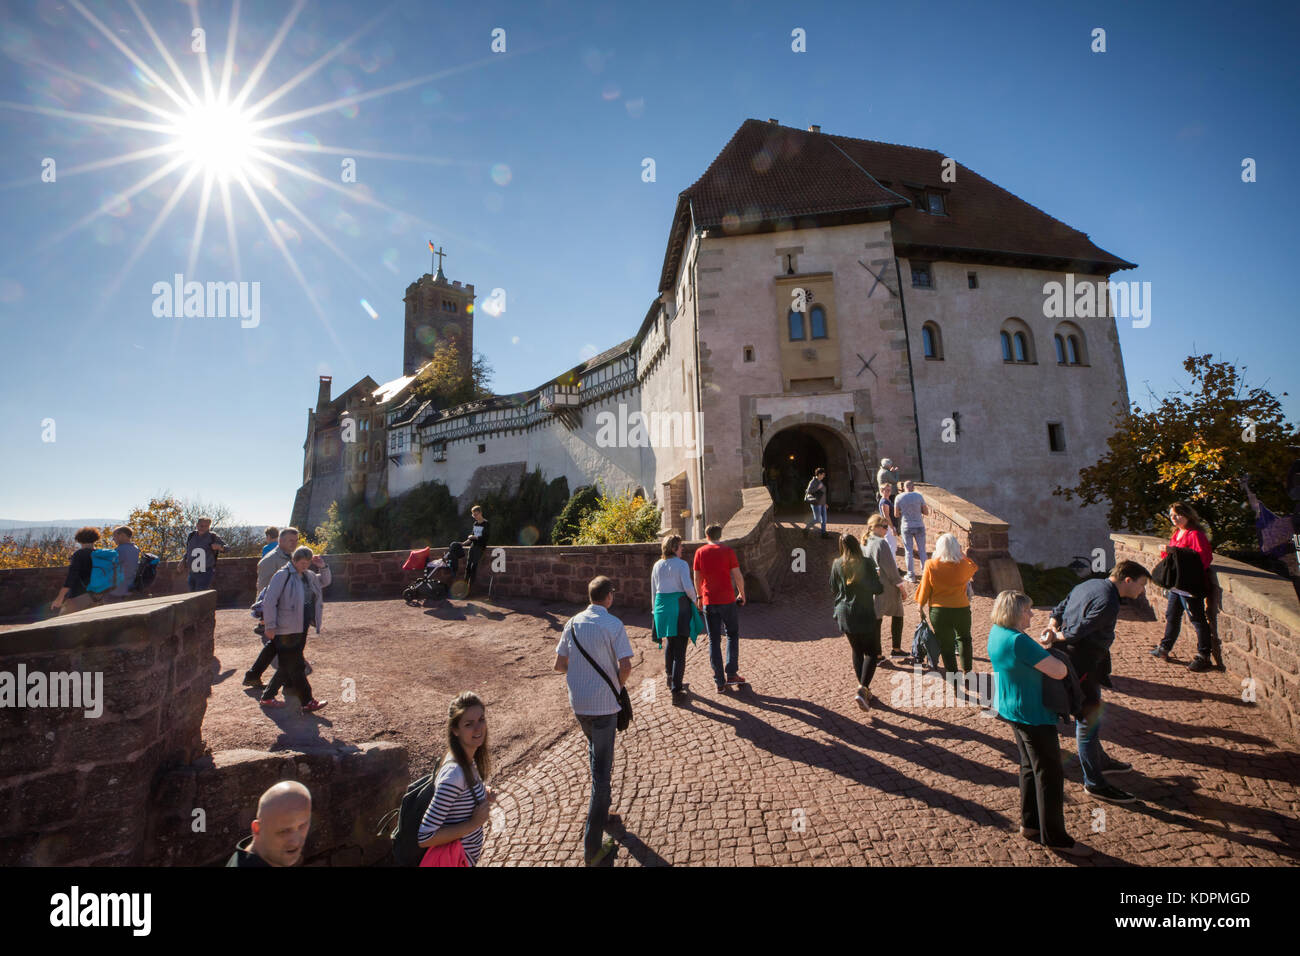 Eisenach, Germany. 14th Oct, 2017. The sun shines on the Wartburg castle in Eisenach, Germany, 14 October 2017. 200 years ago, on 18 October 2017, students and professors from almost all protestant universities met here to protest against sectionalism and for a German nation state. Credit: dpa picture alliance/Alamy Live News Stock Photo